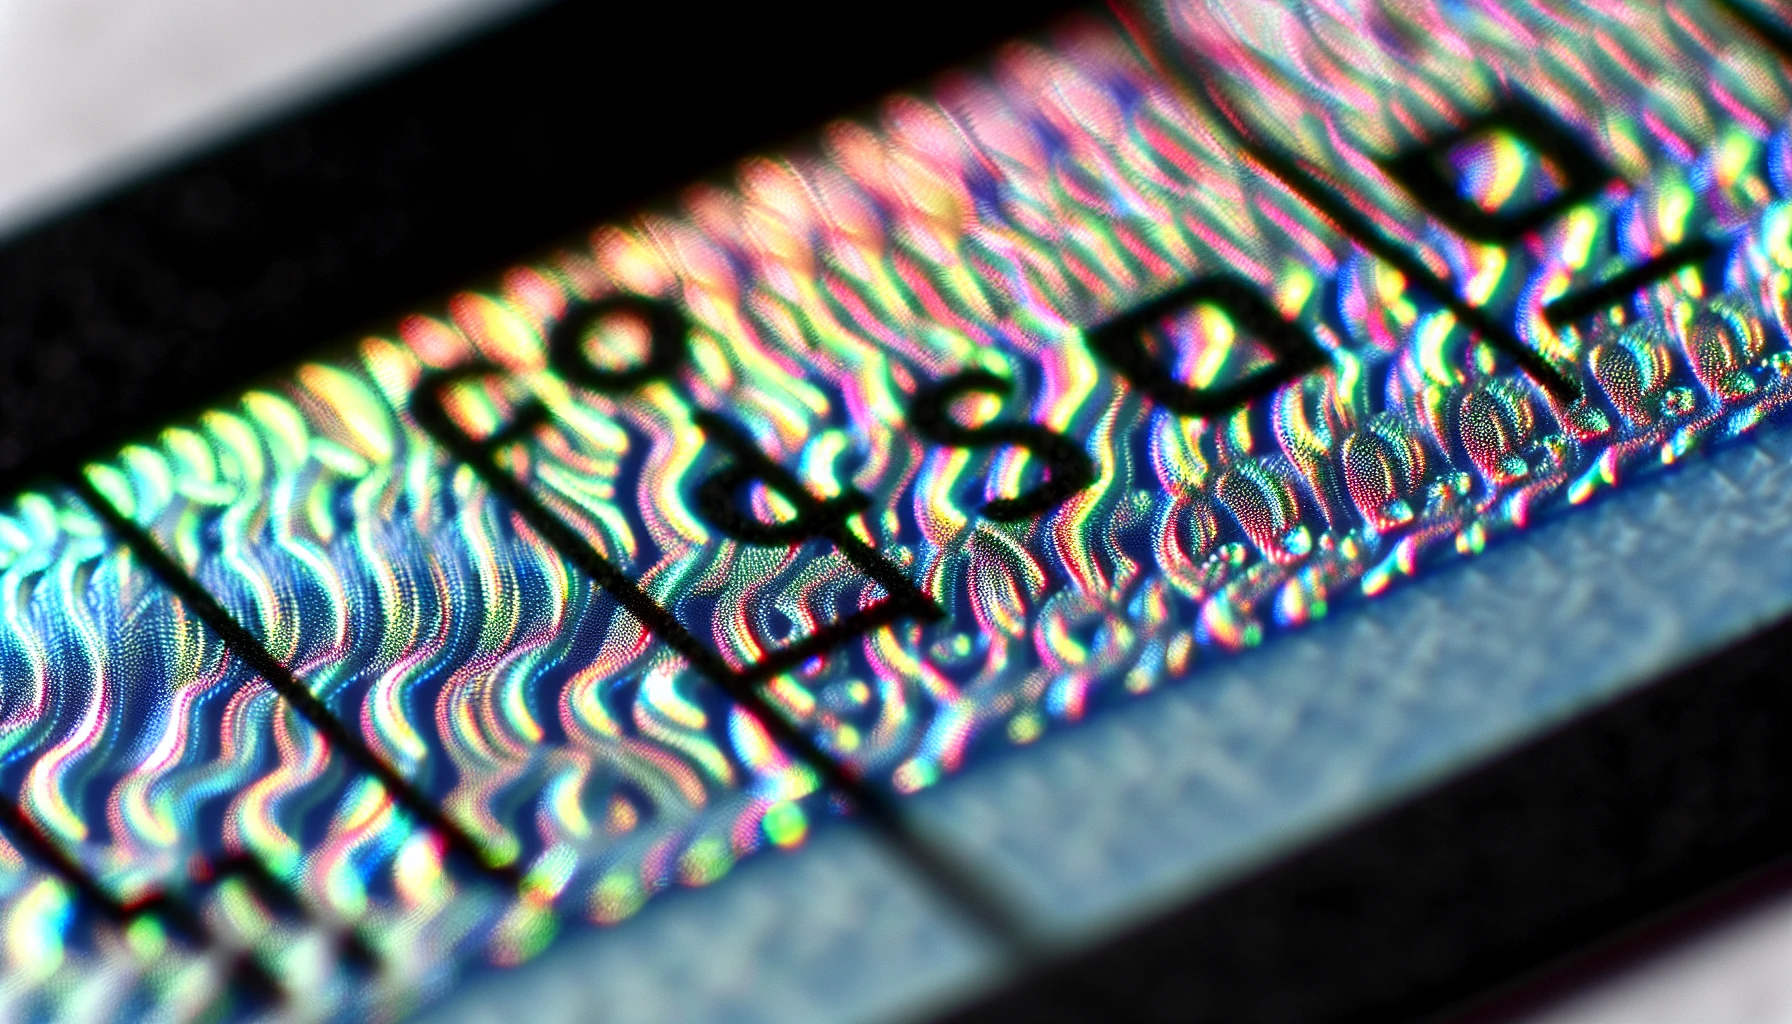 Close-up of holographic security features on an ID card